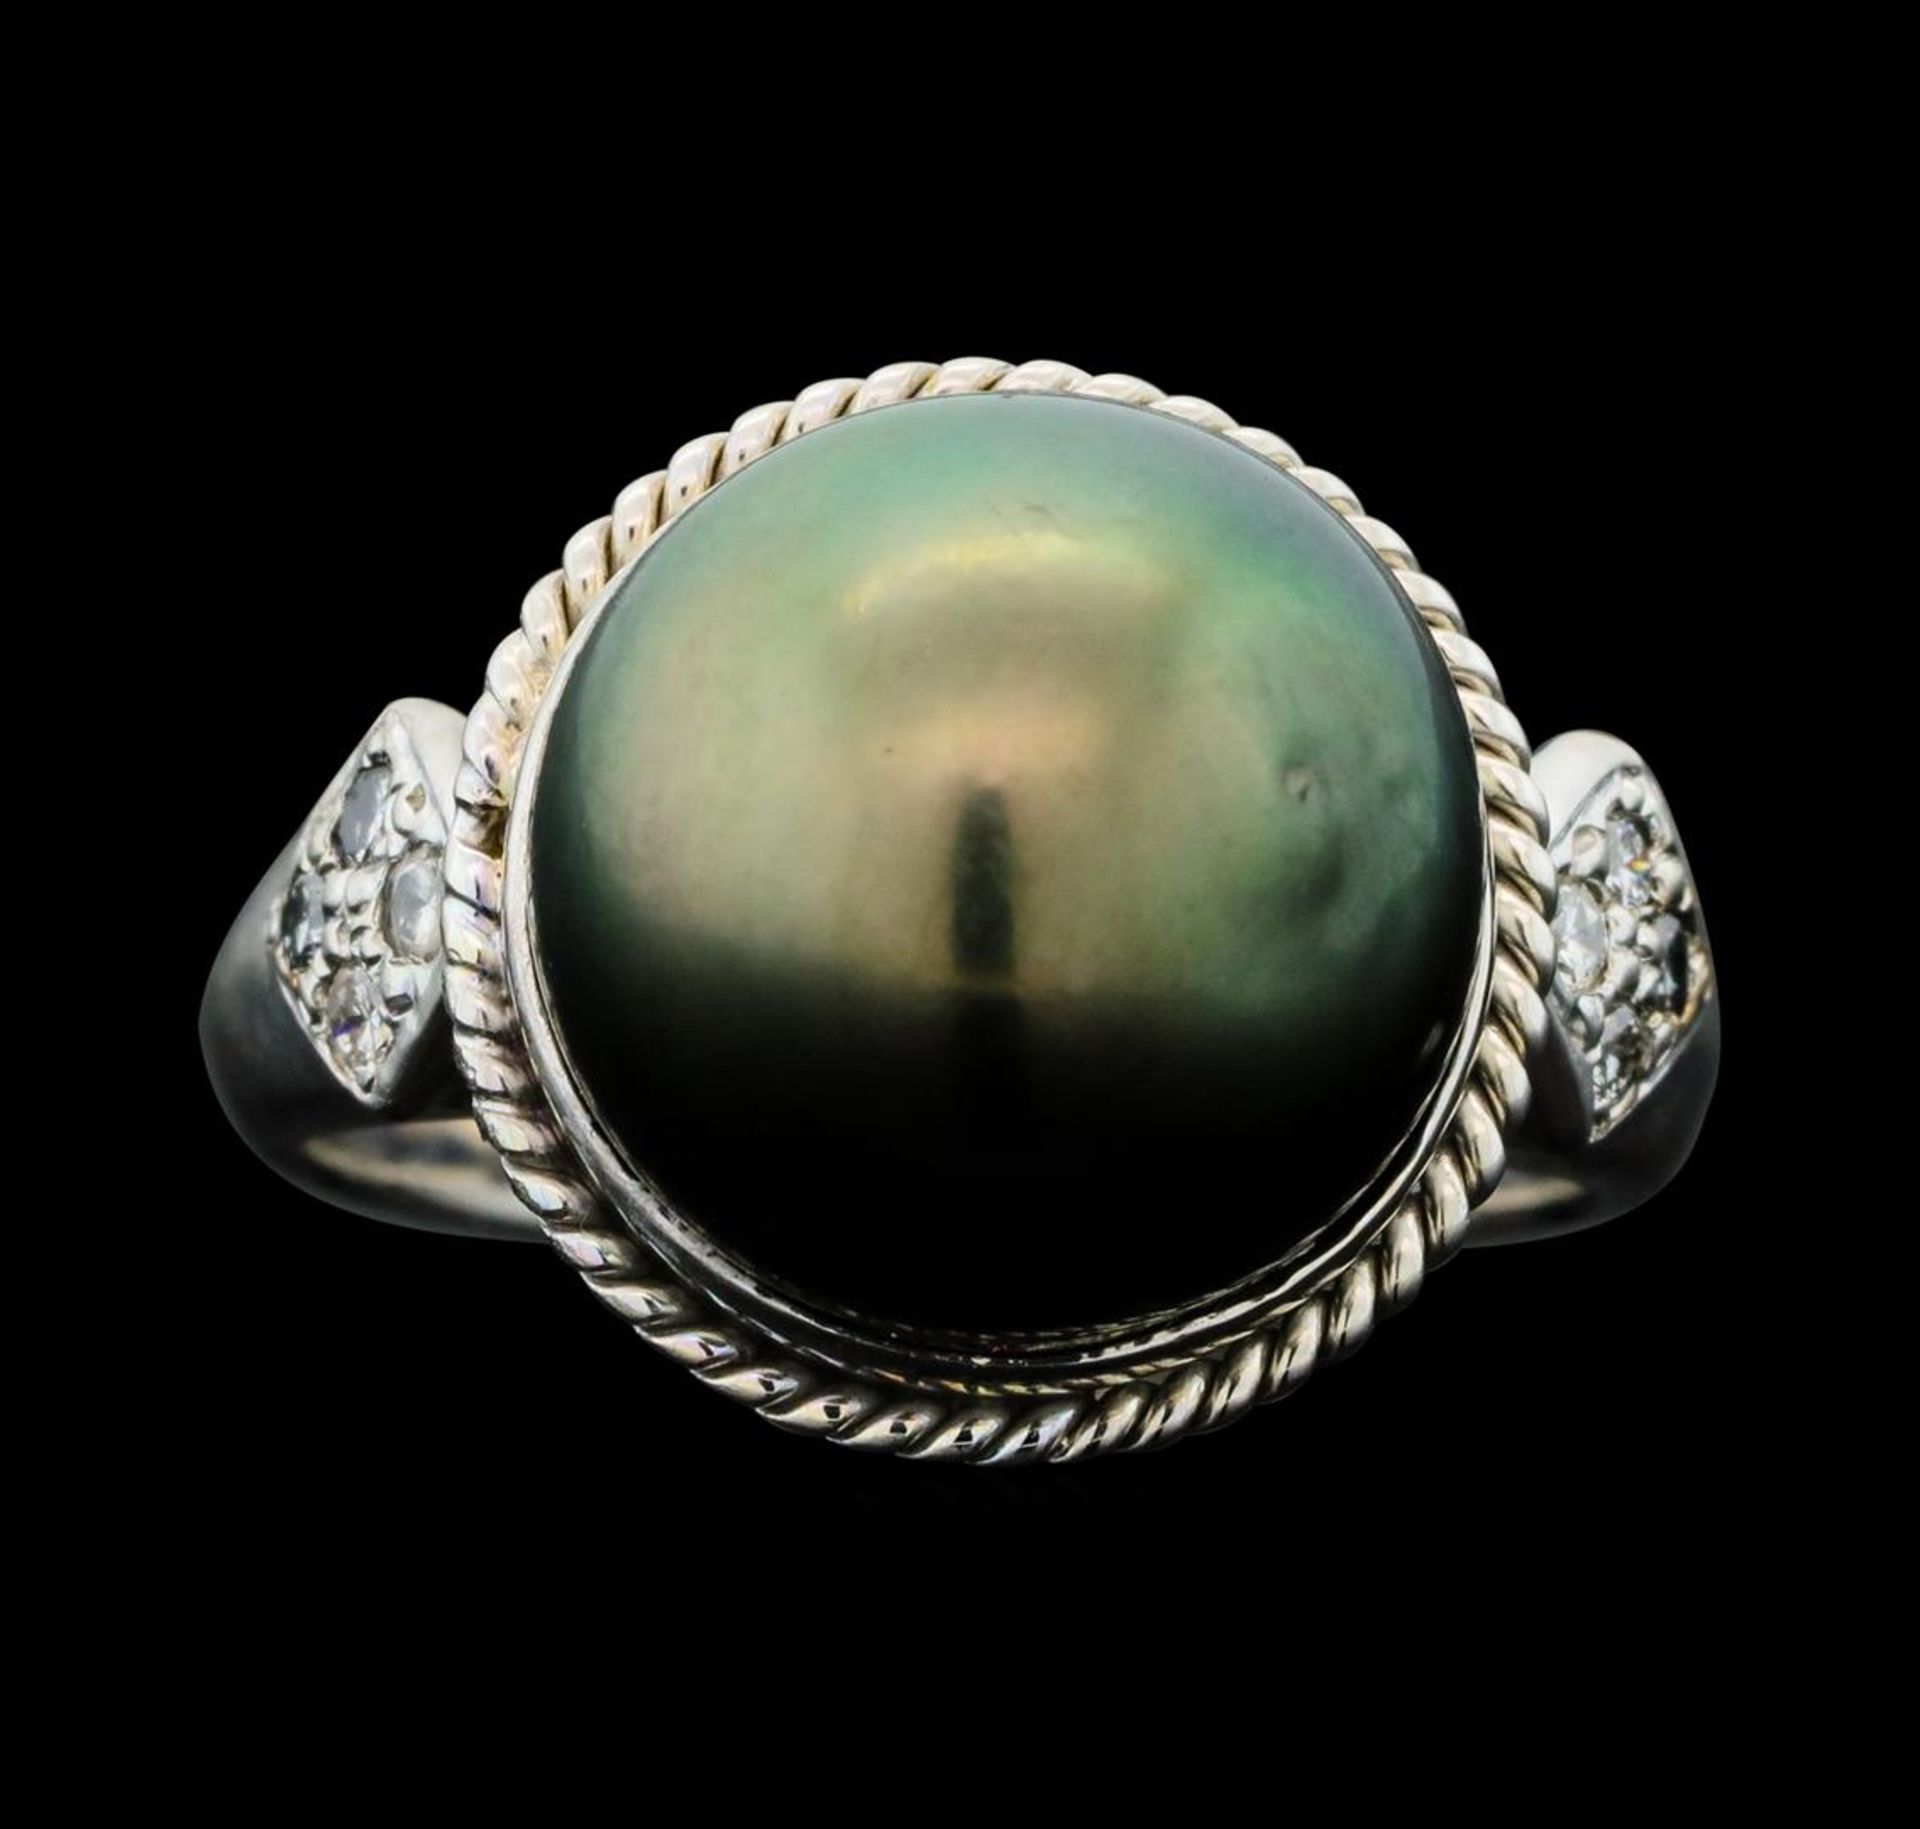 Tahitian Pearl and Diamond Ring - 14KT White Gold - Image 2 of 5